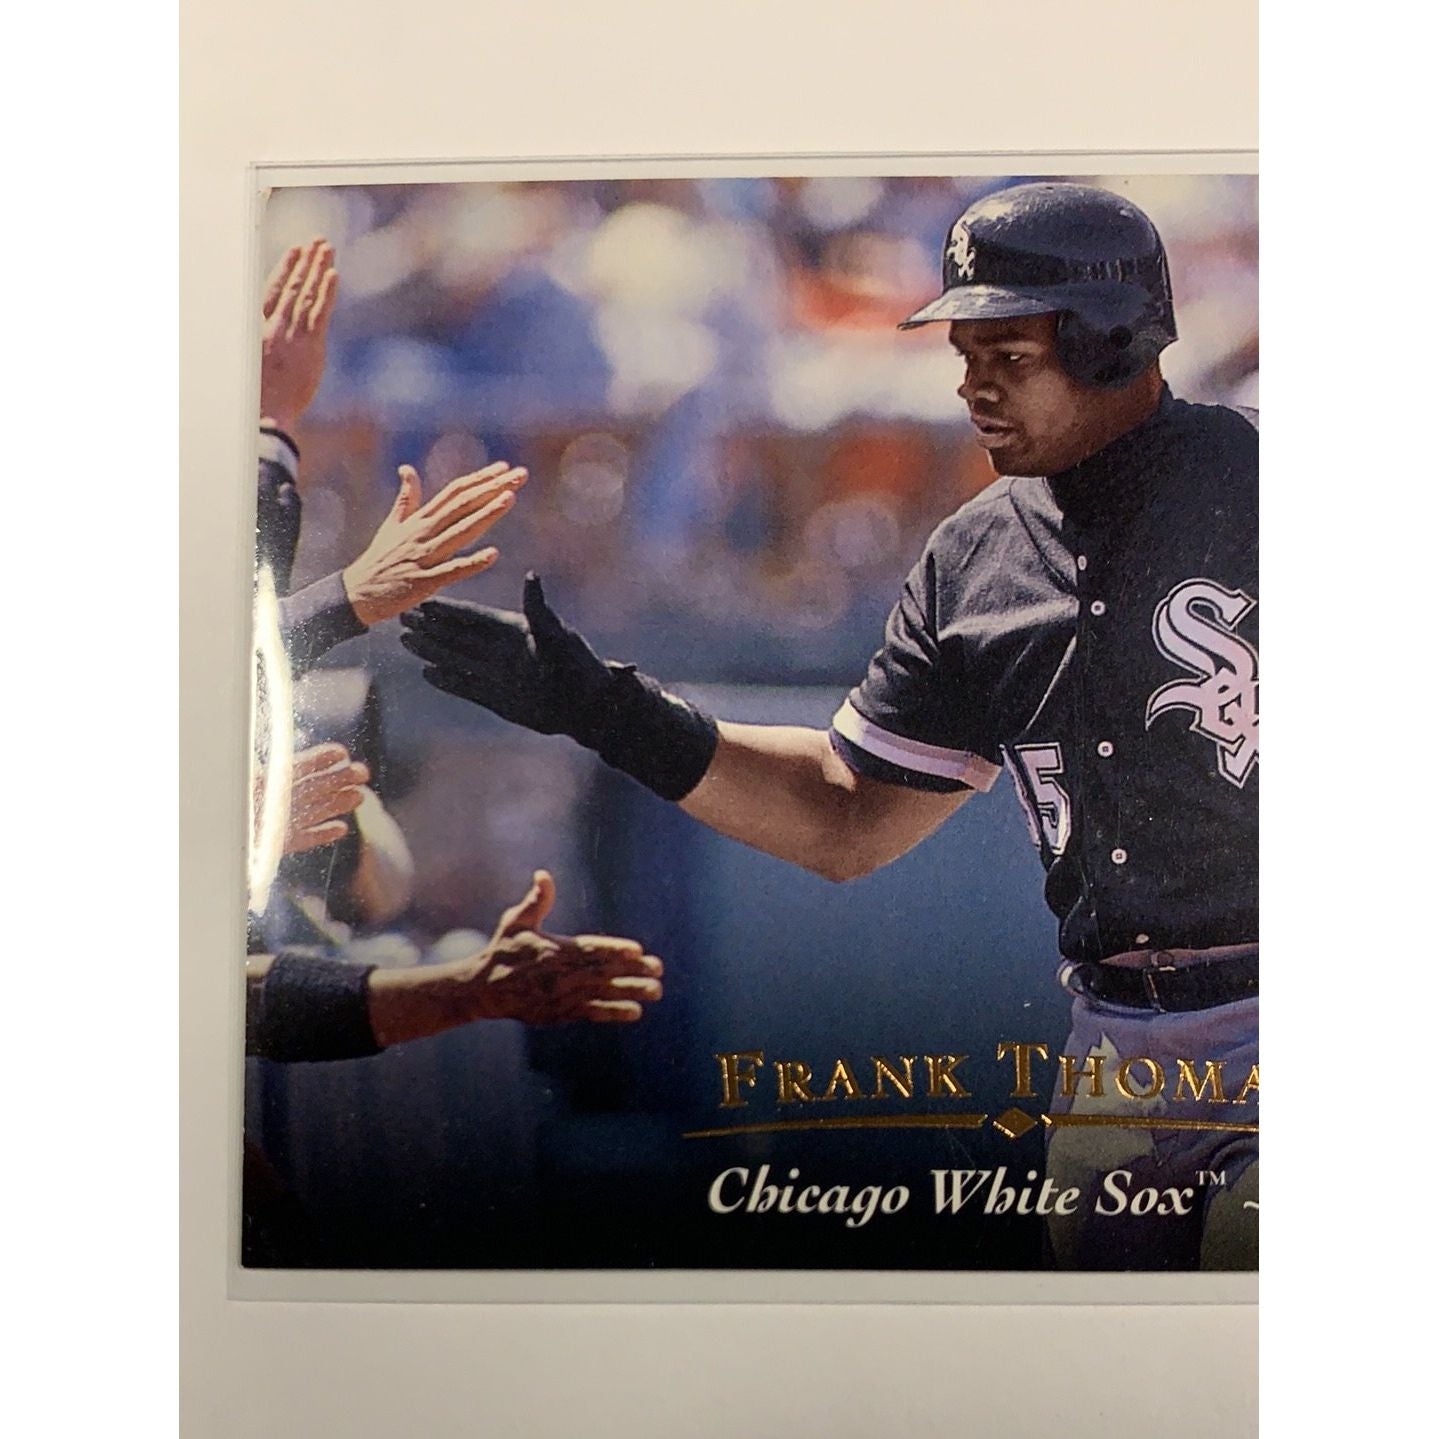  1995 Upper Deck Frank Thomas Base #435  Local Legends Cards & Collectibles